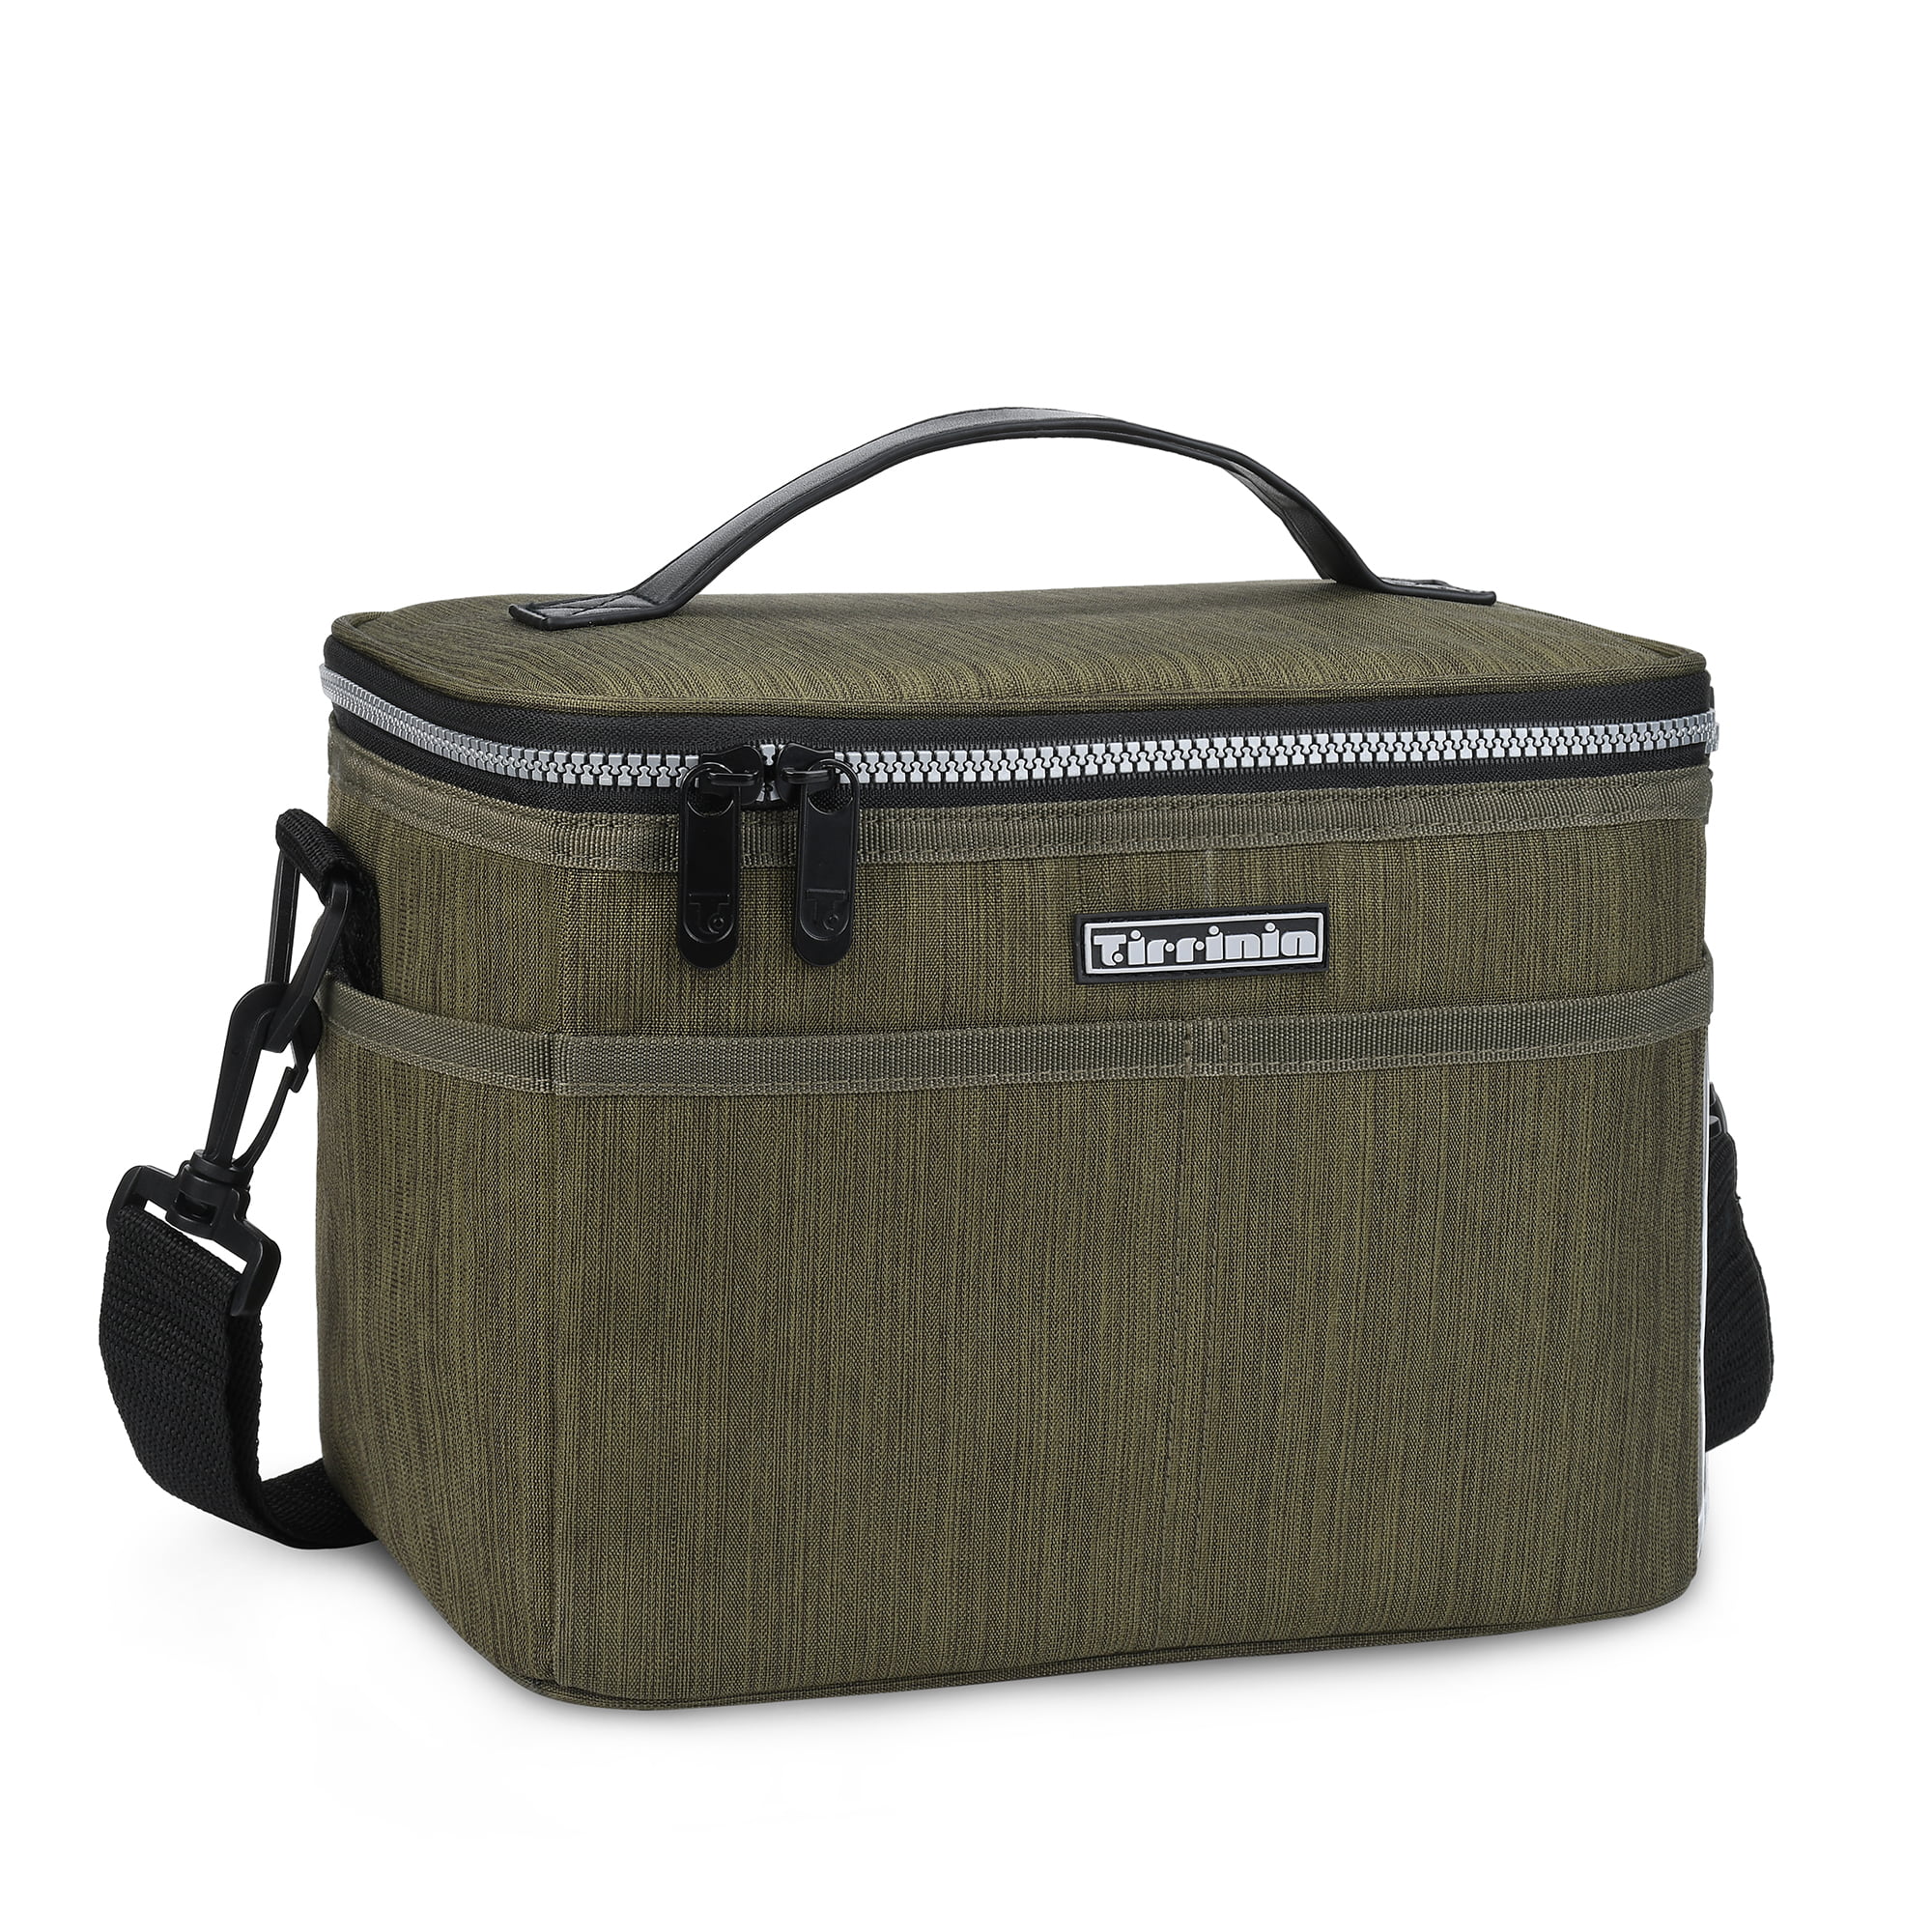 Tirrinia Leakproof Thermal Reusable Insulated Lunch Bag for Men with Leather Handle,Olive - image 1 of 7